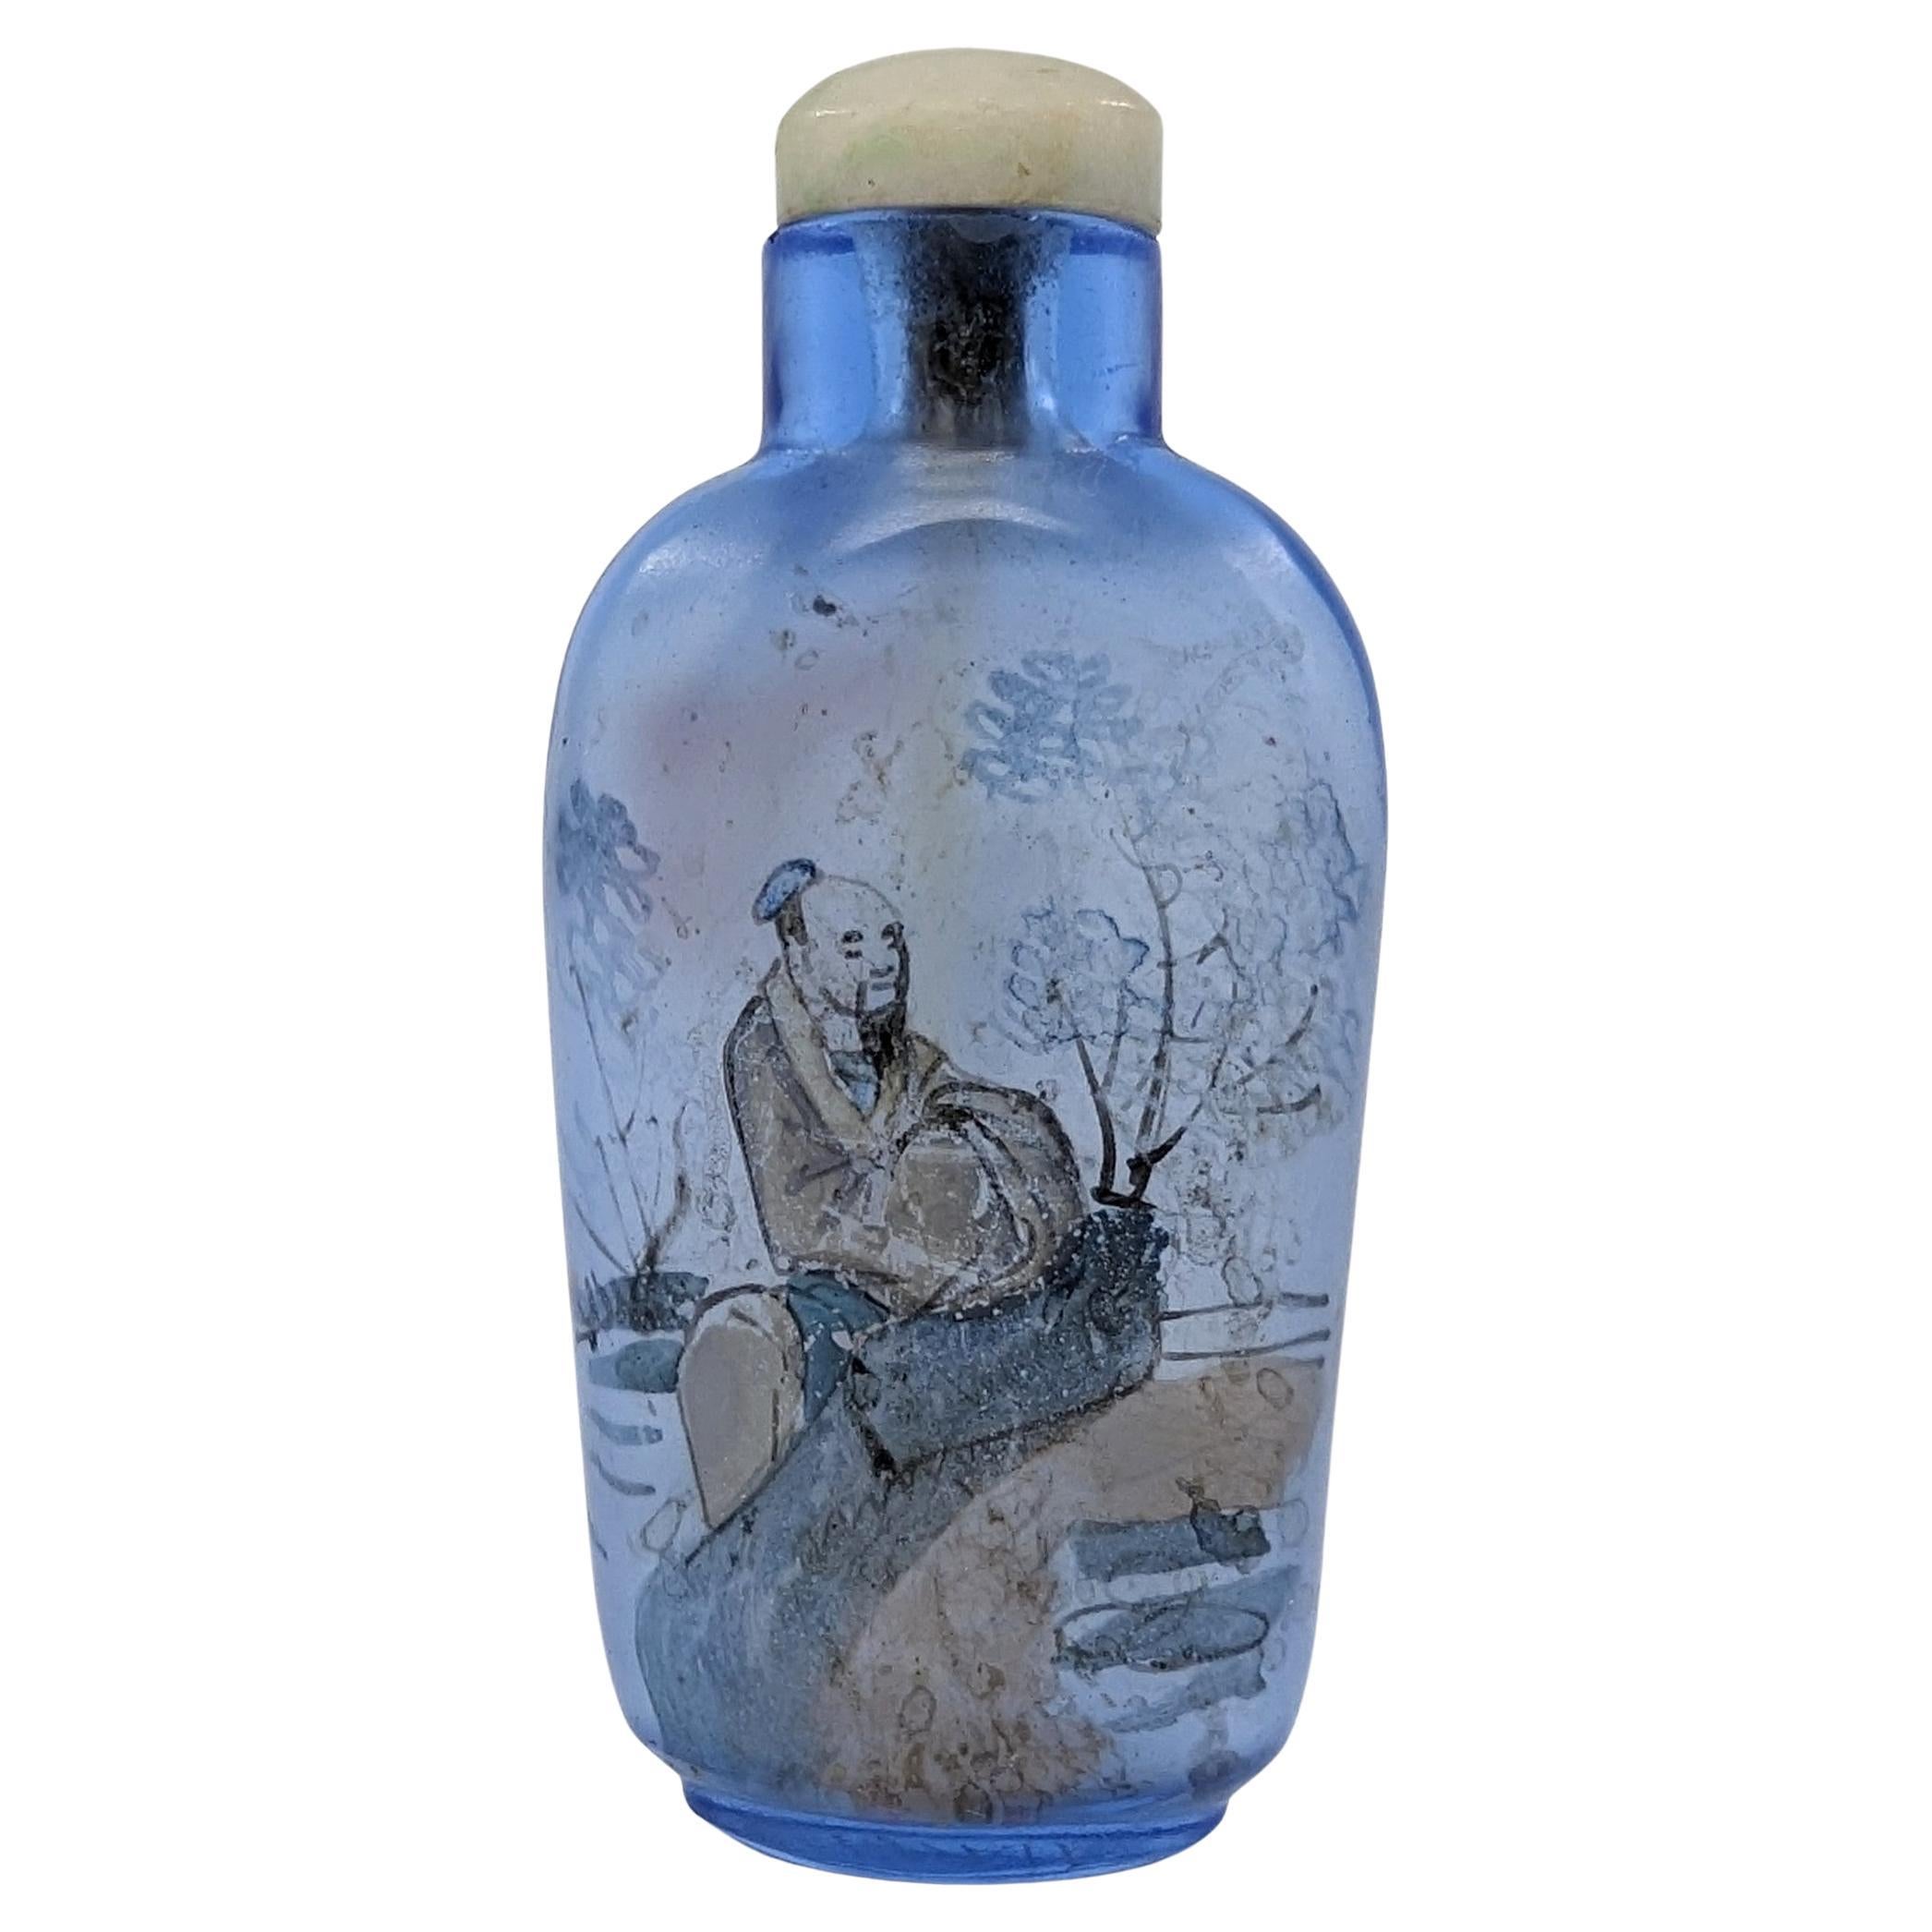 An antique Chinese inside painted blue glass snuff bottle with a jadeite stopper. Inside painted with a sitting scholar to one side and a pacing scholar to the other side

Late 19th to early 20th Century, Late Qing to Republic period